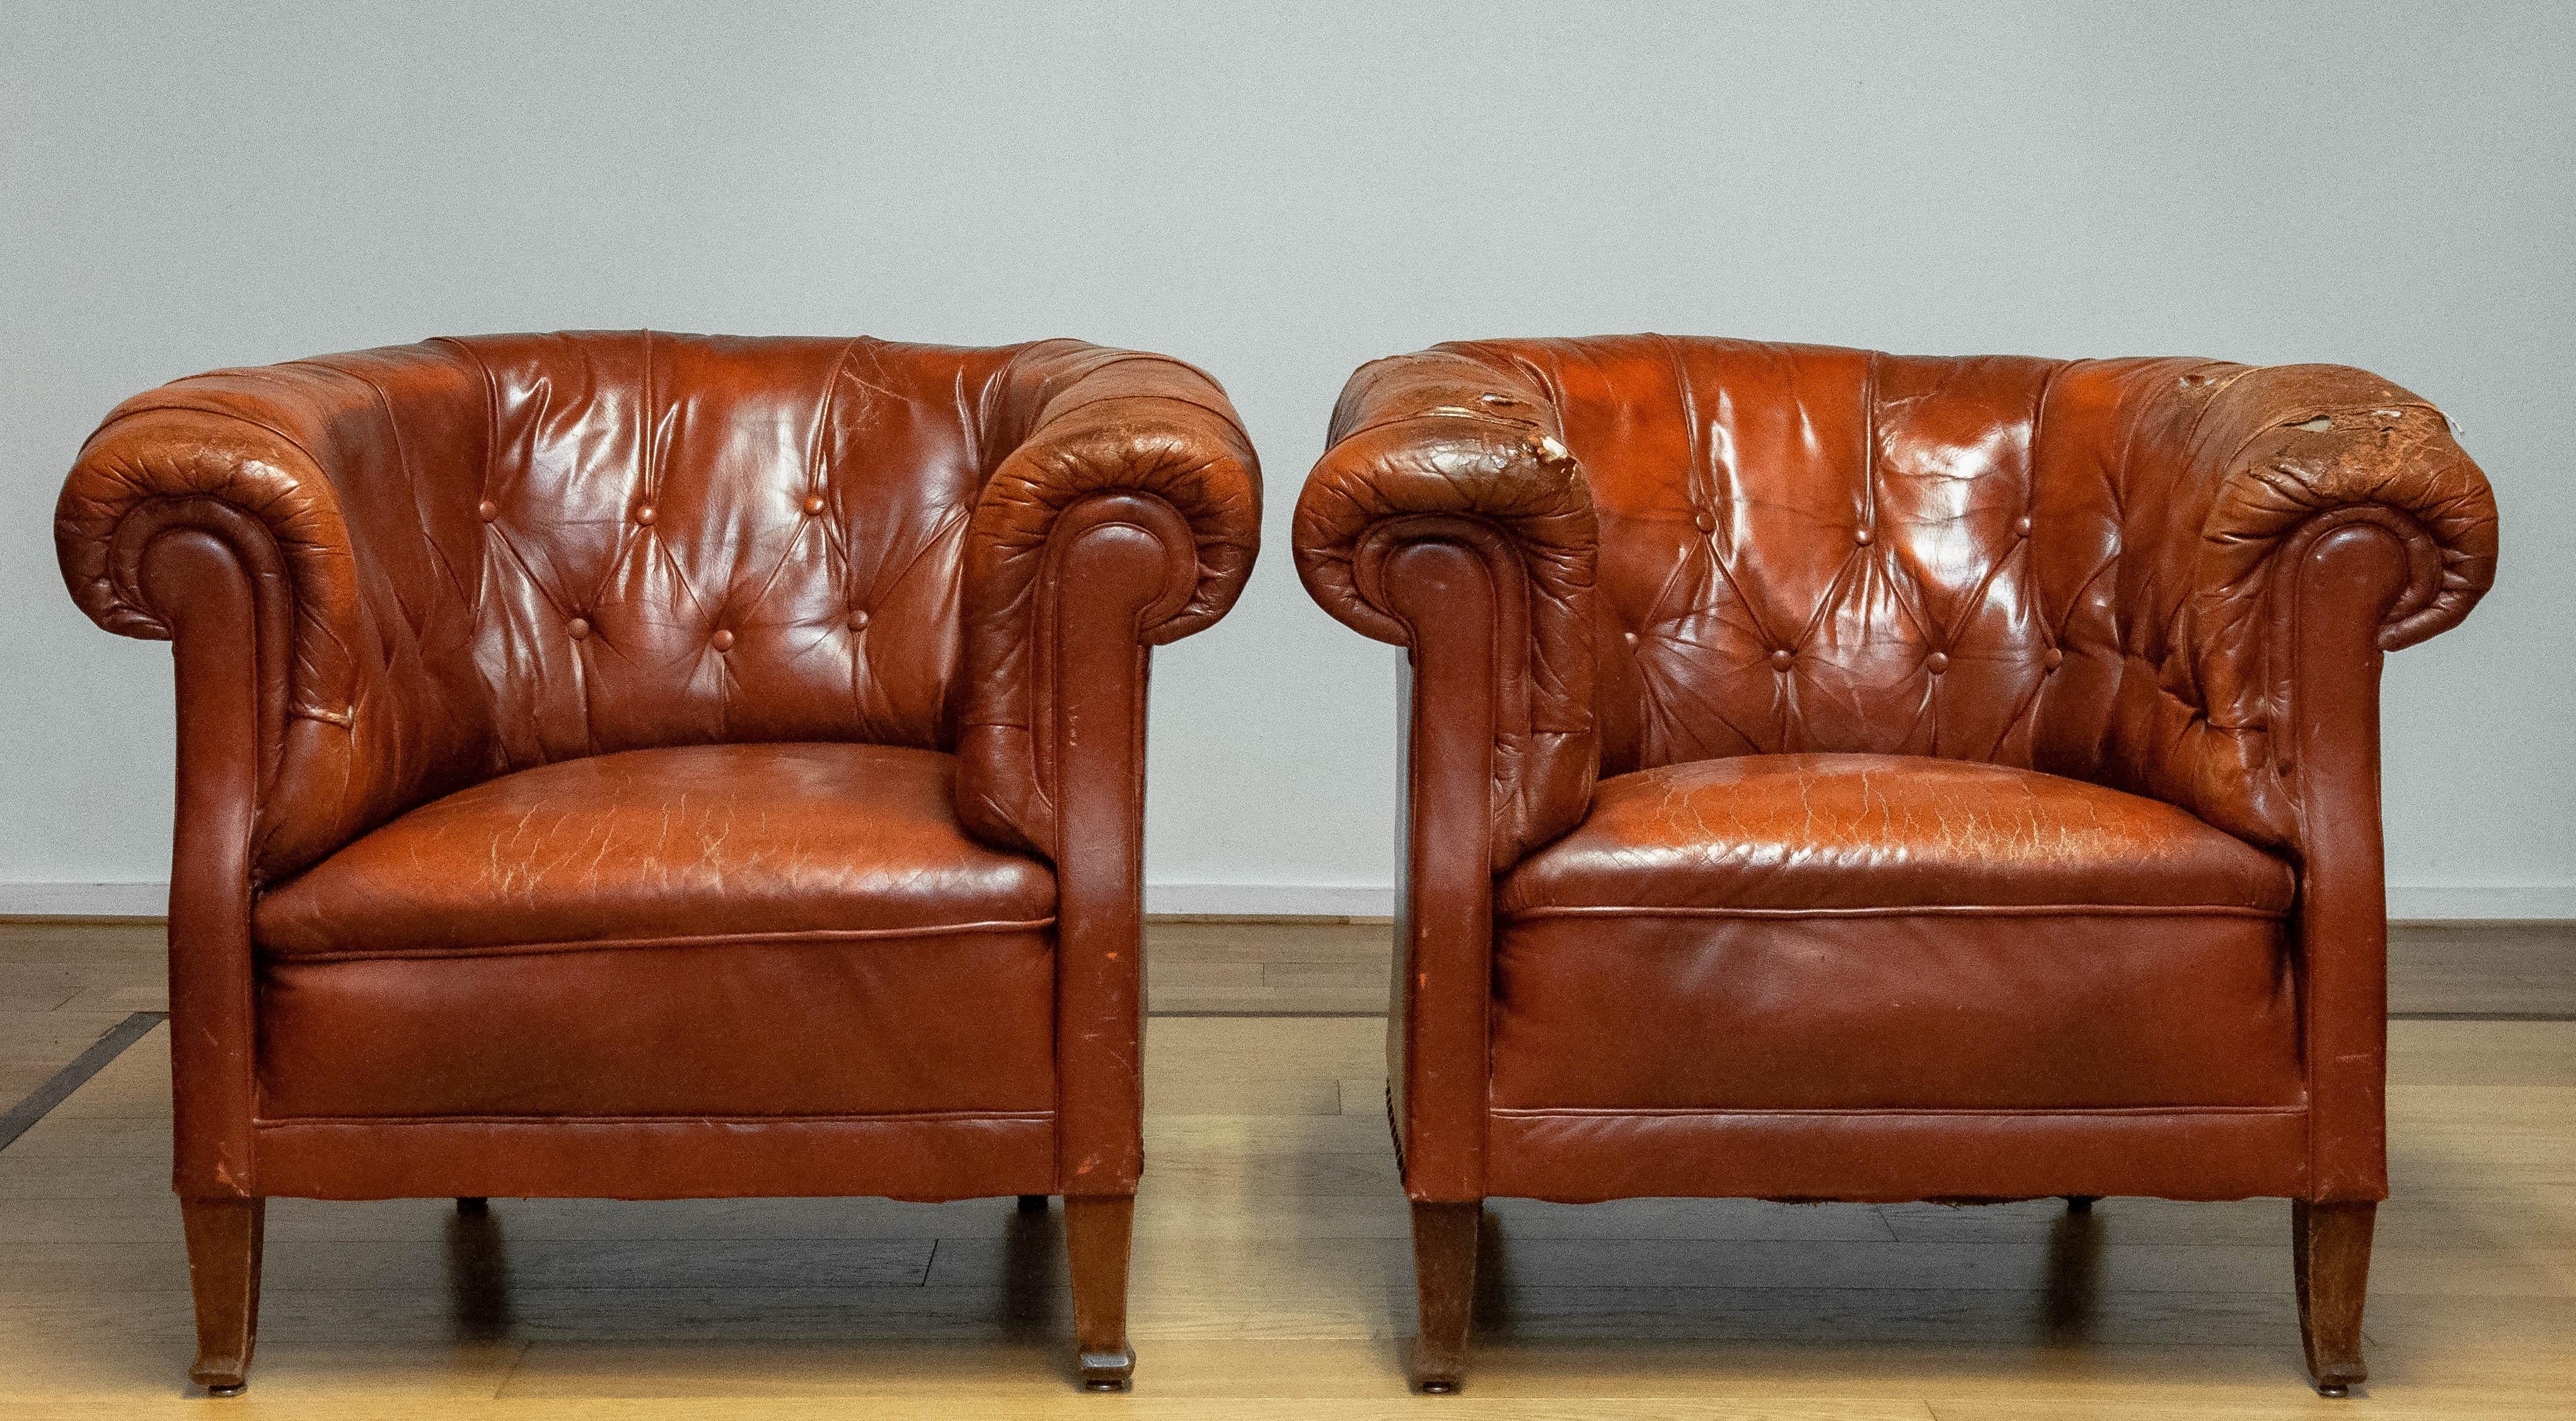 1940s Swedish Tufted Club Chair 'Chesterfield Model' In Tan Brown Worn Leather 11